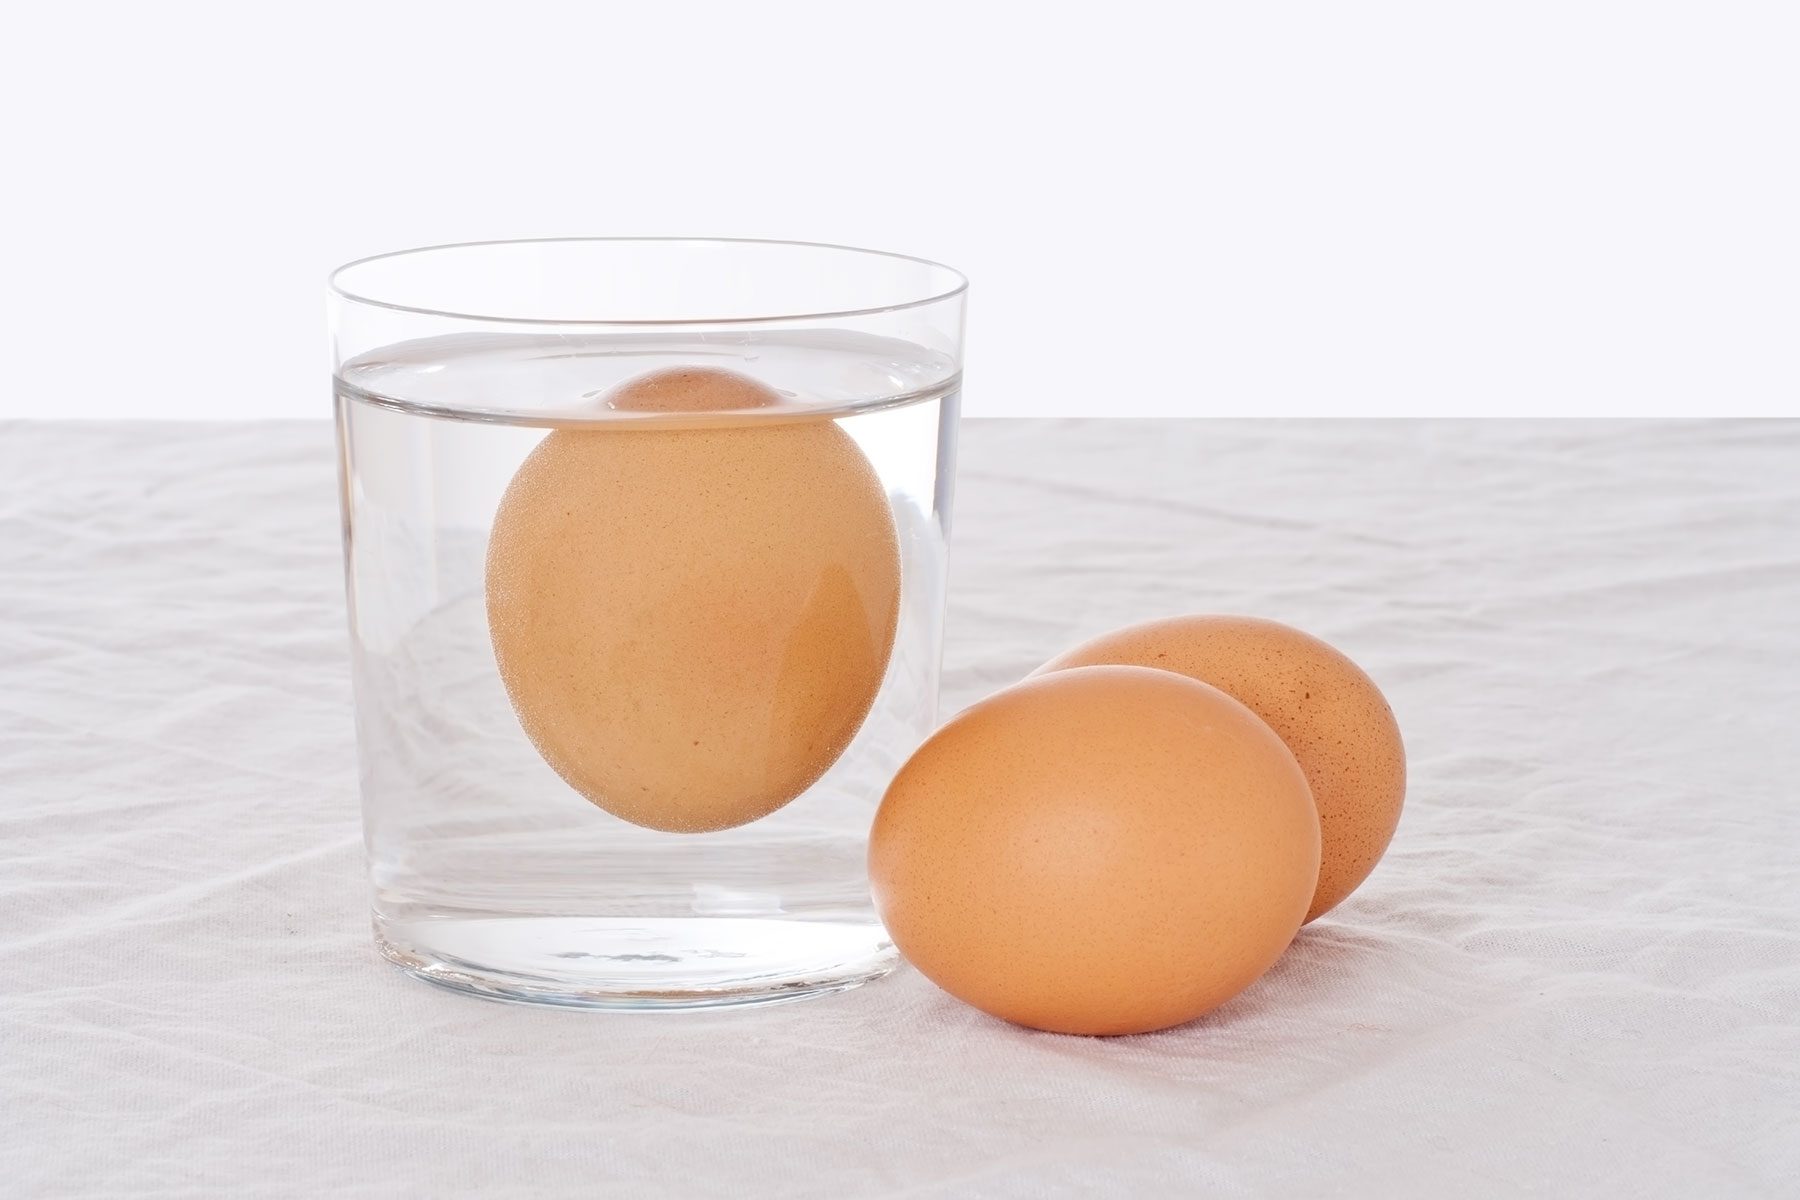 Egg in a glass of water